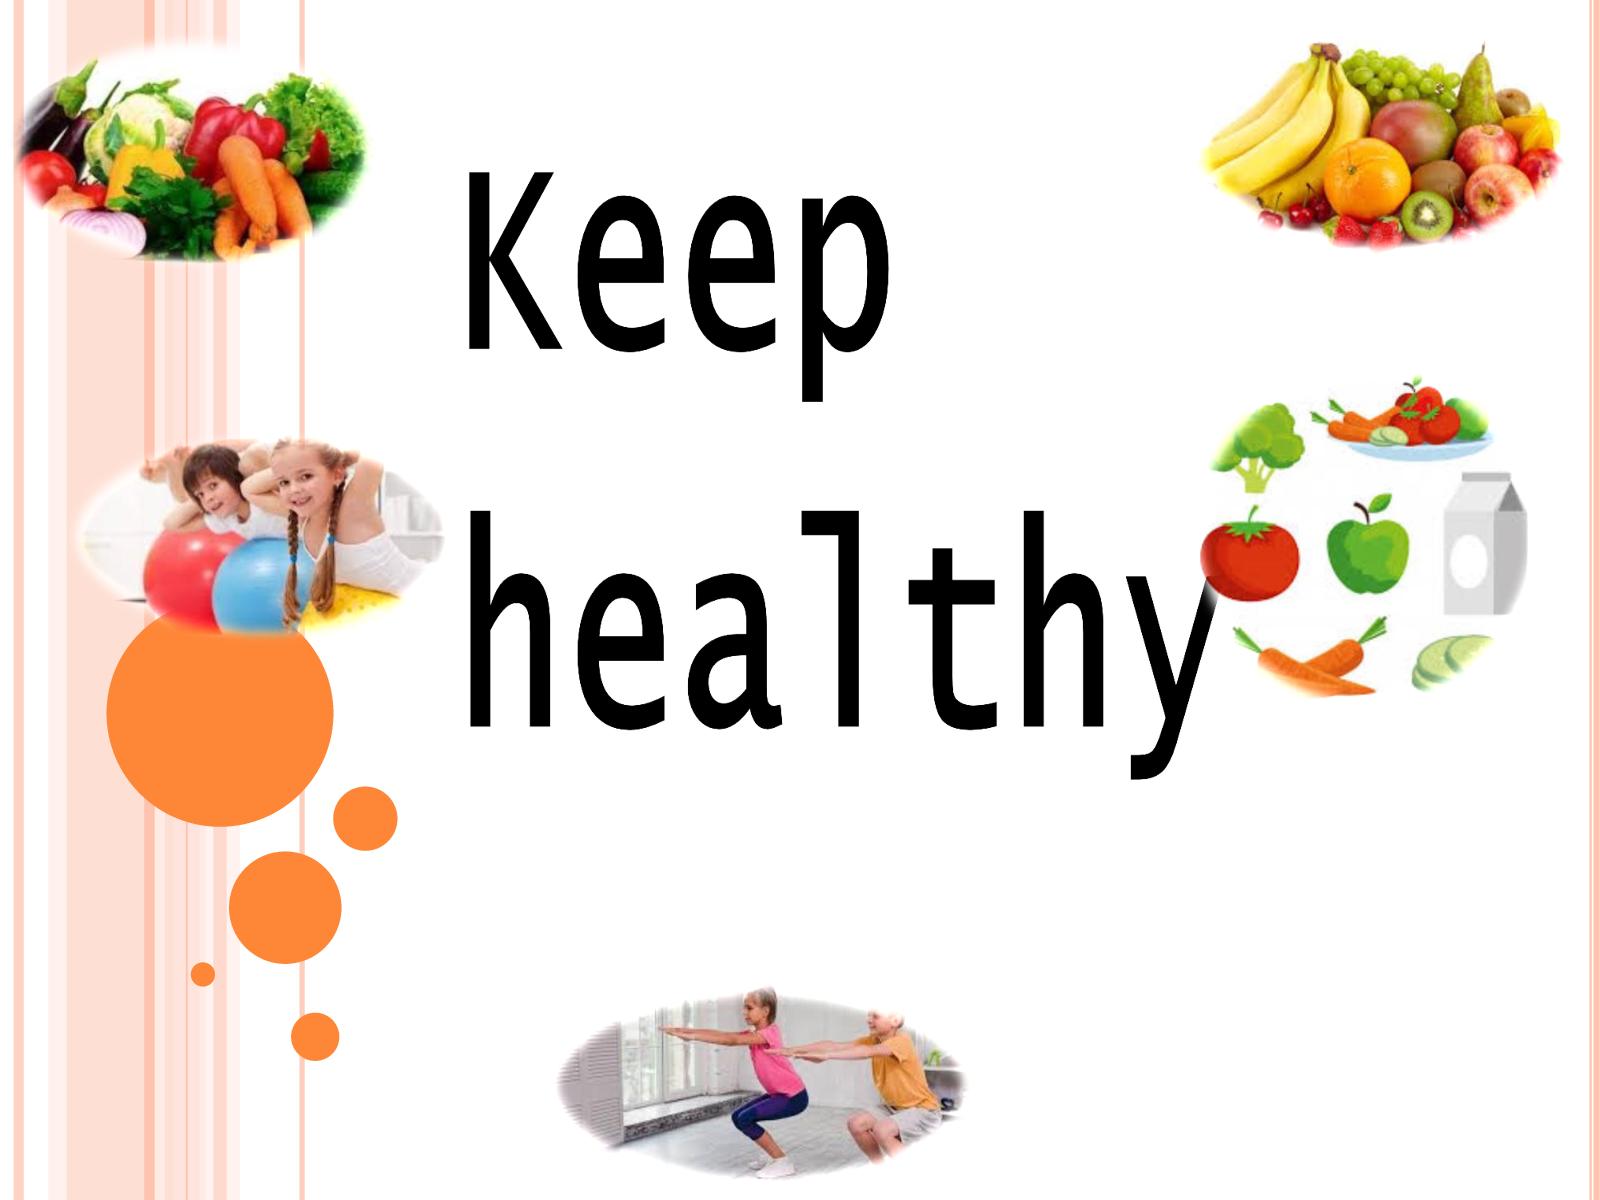 How to keep our bodies healthy?